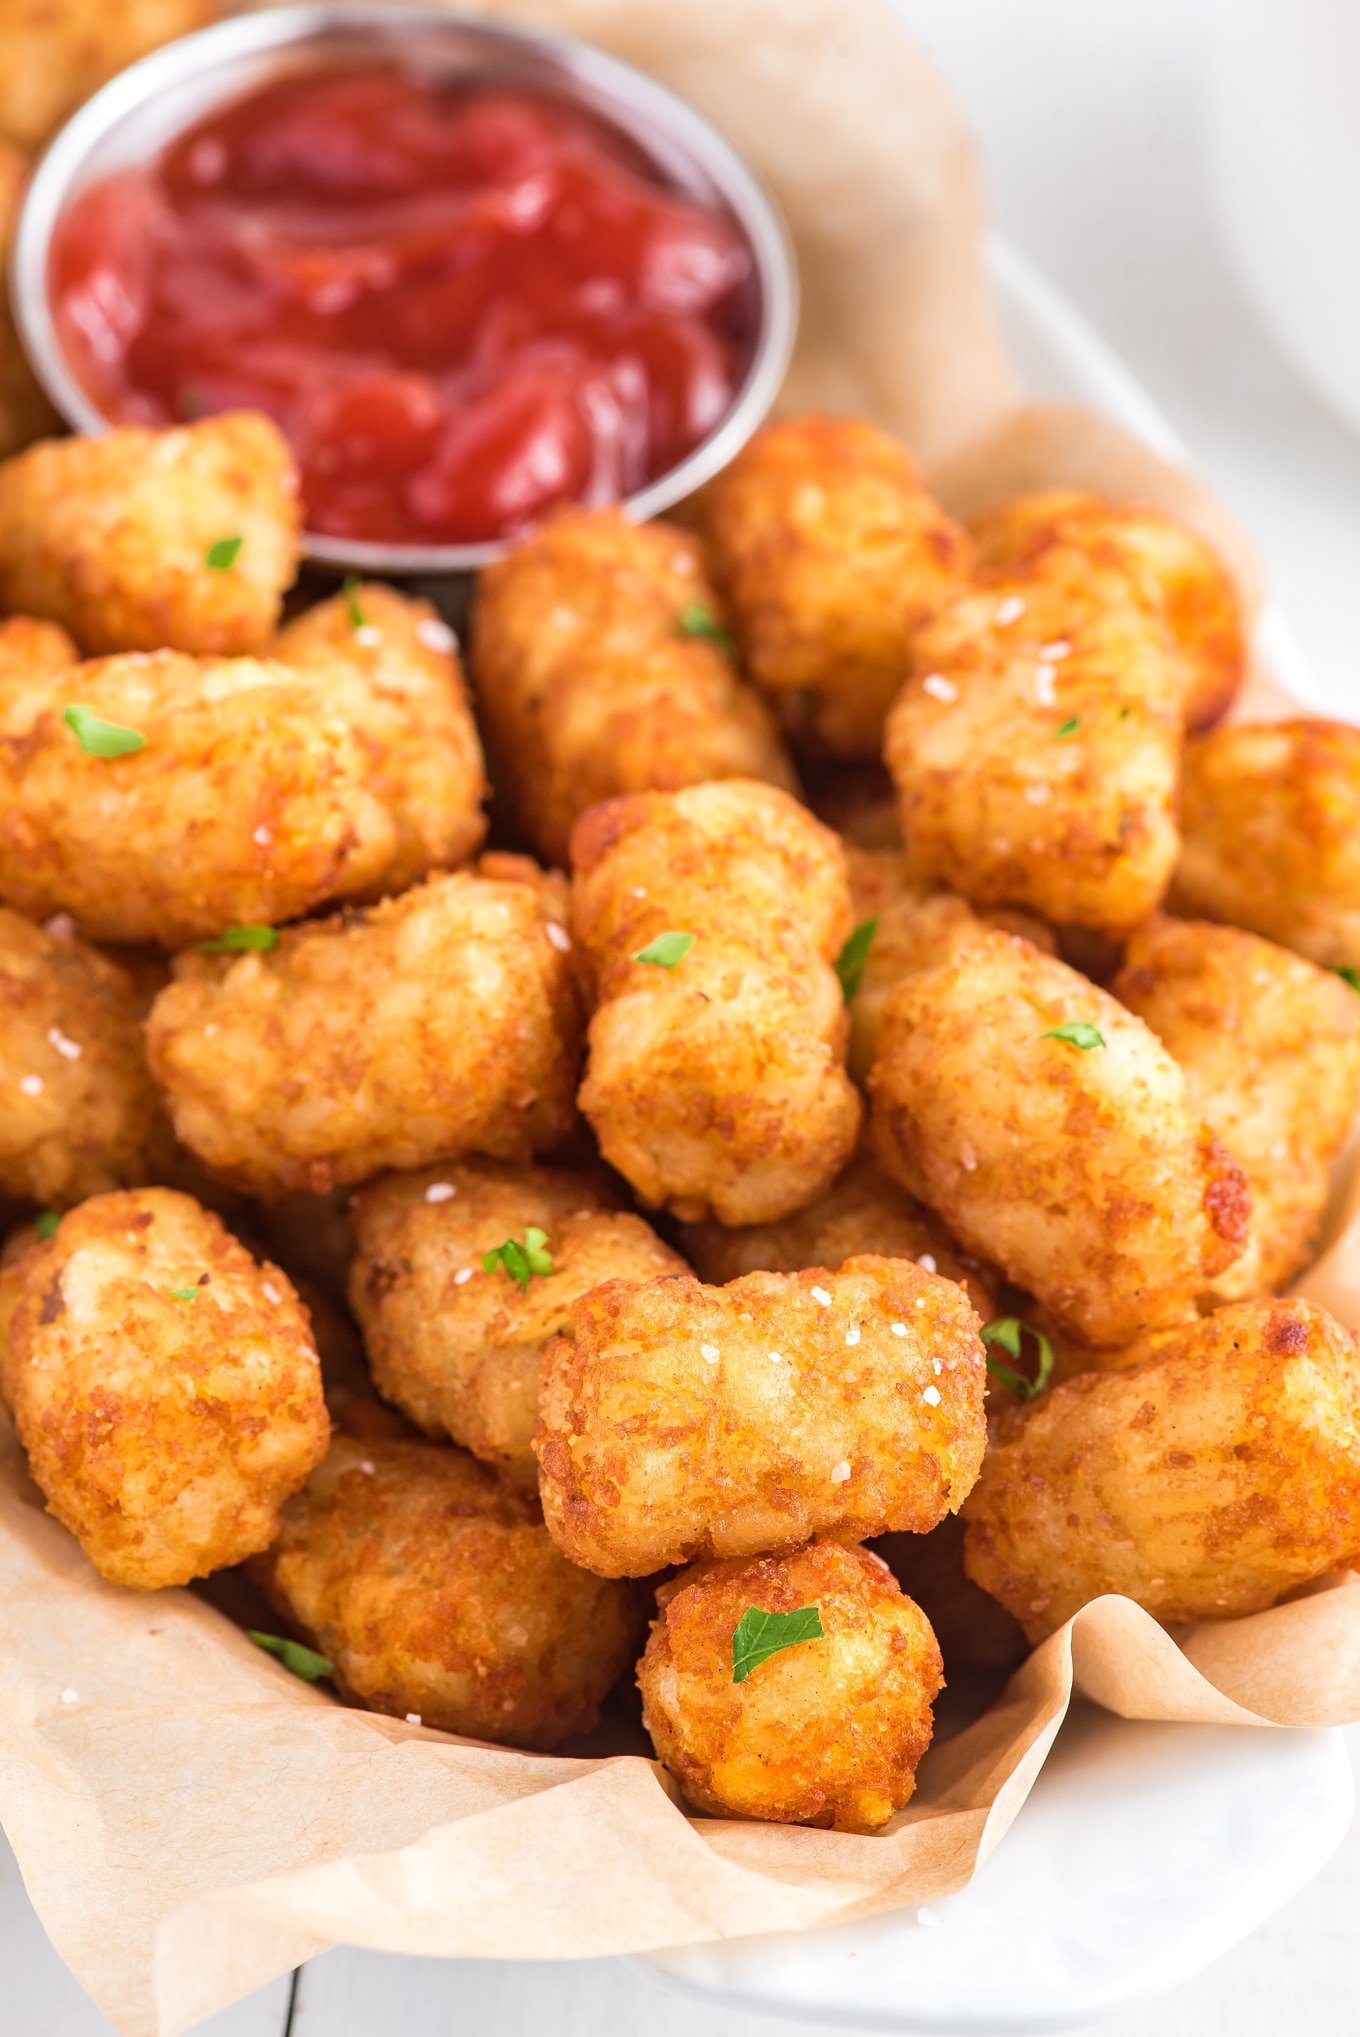 A close-up photo of a basket of air fryer tater tots. The tots are golden brown and crispy, and they are piled high on in the basket. There is a small bowl of ketchup on the side of the basket.